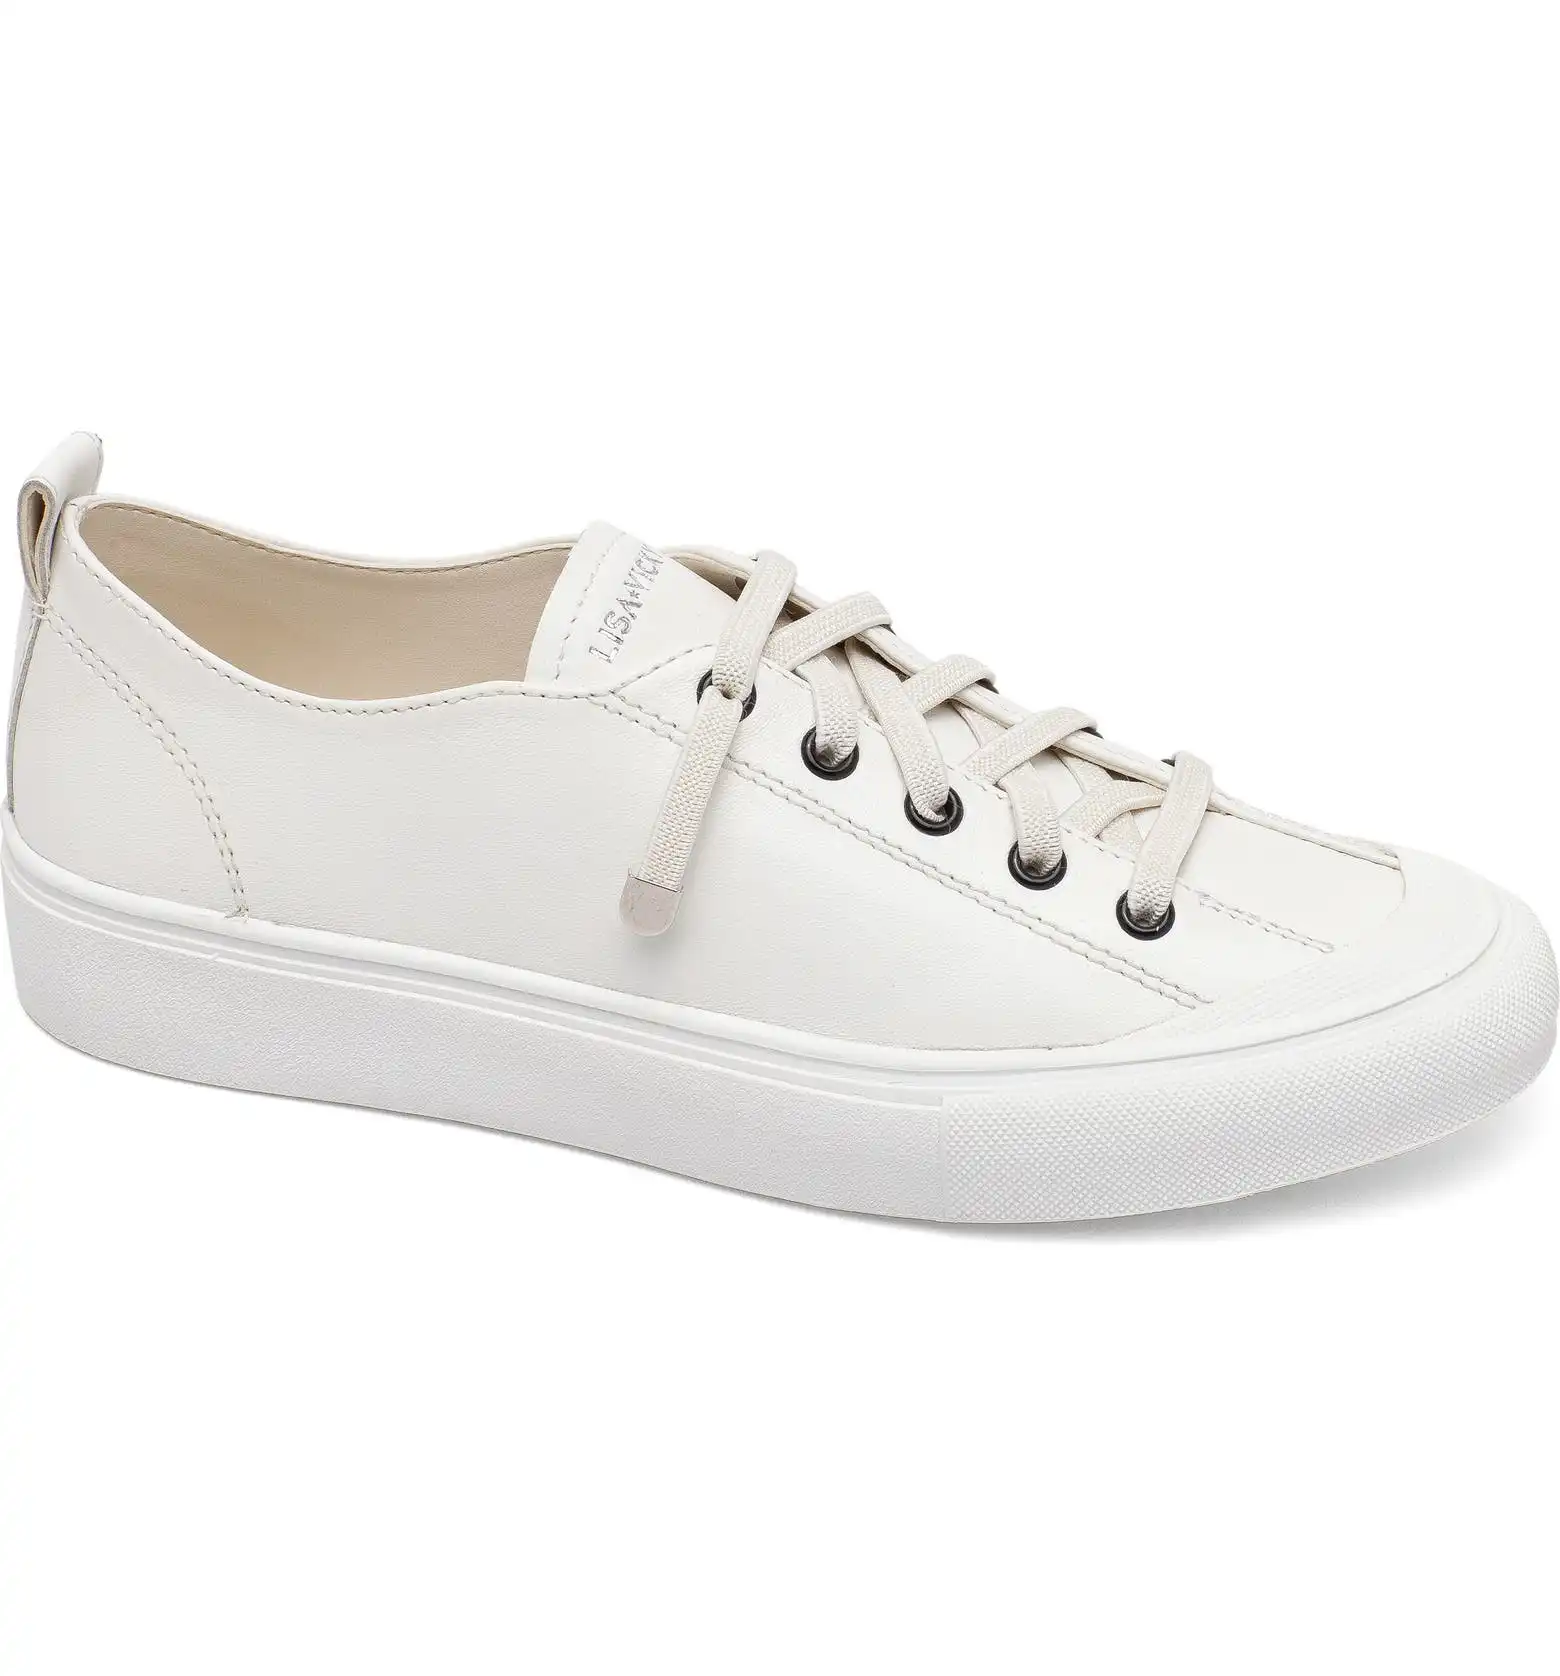 Lisa Vicky Goodness Low Top Sneaker